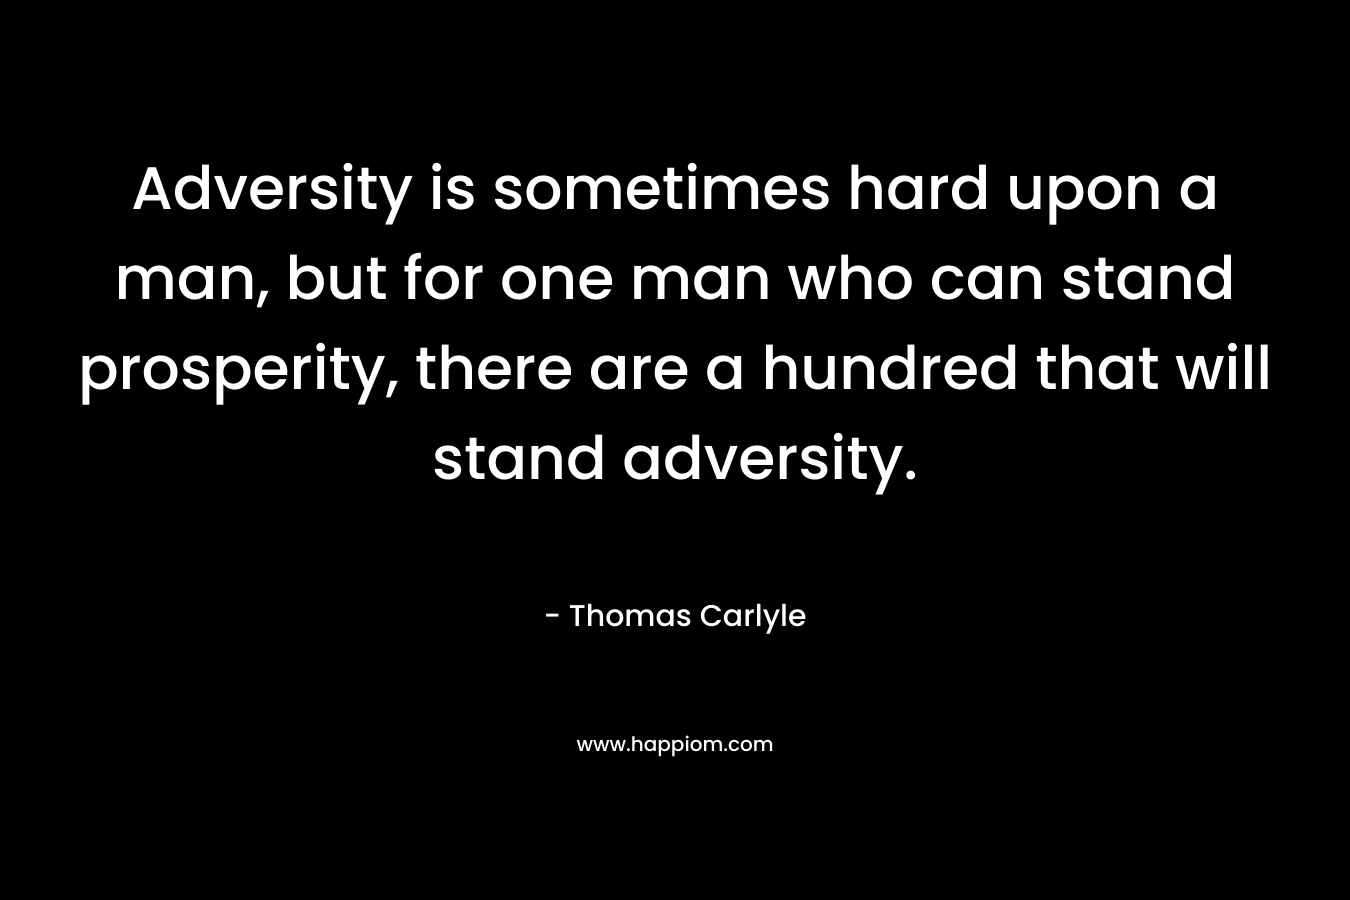 Adversity is sometimes hard upon a man, but for one man who can stand prosperity, there are a hundred that will stand adversity. – Thomas Carlyle